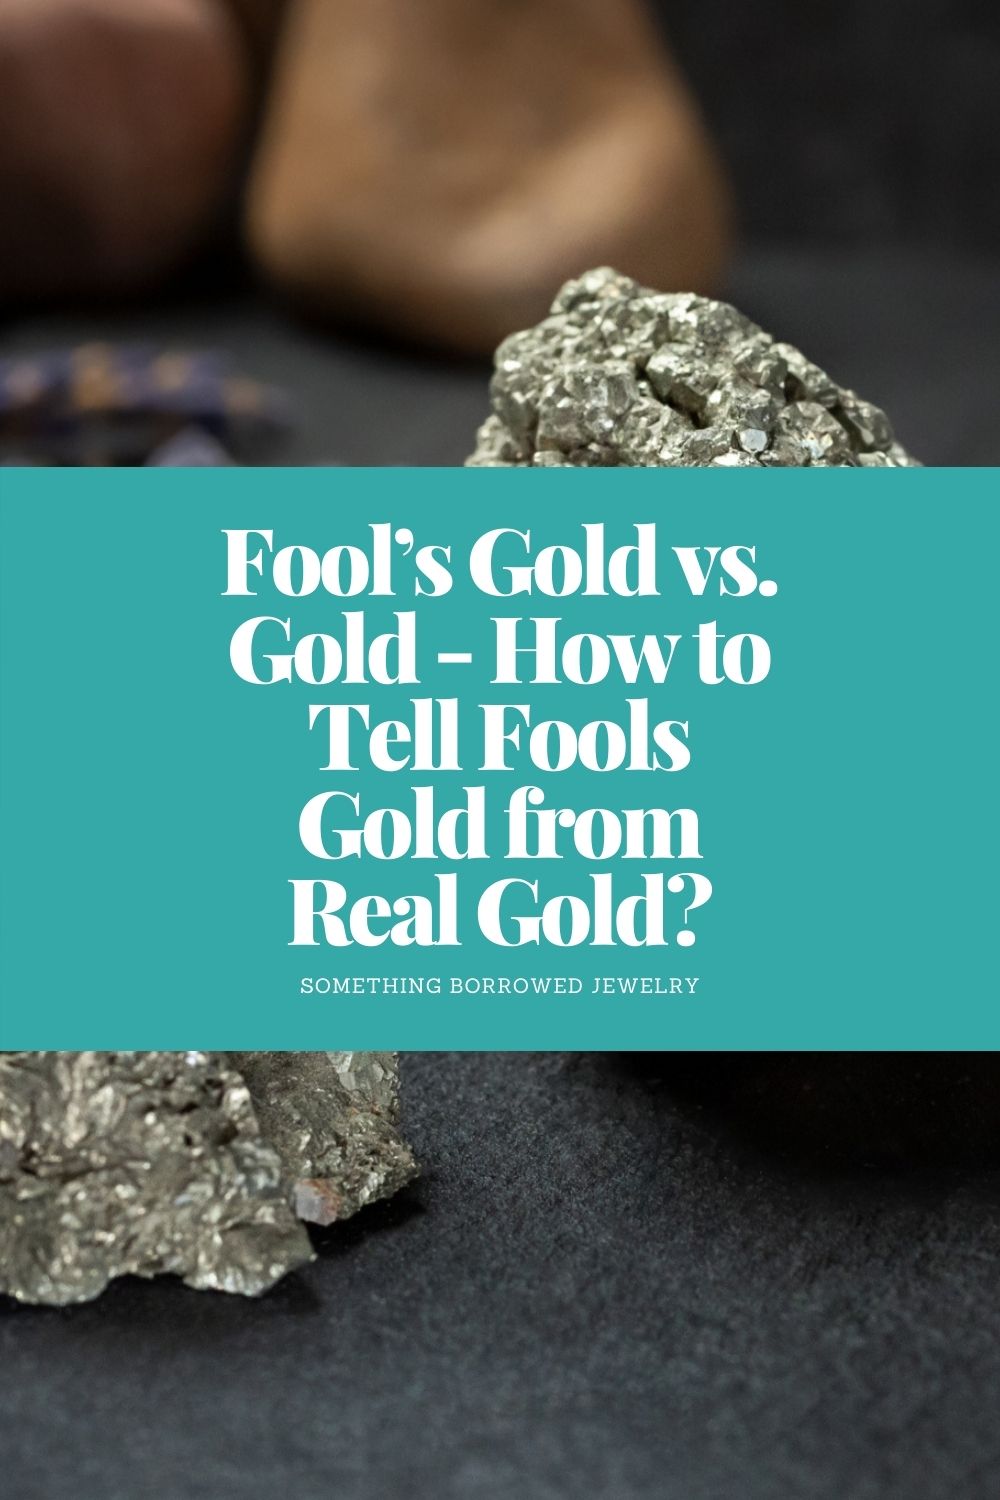 Fool’s Gold vs. Gold - How to Tell Fools Gold from Real Gold pin 2